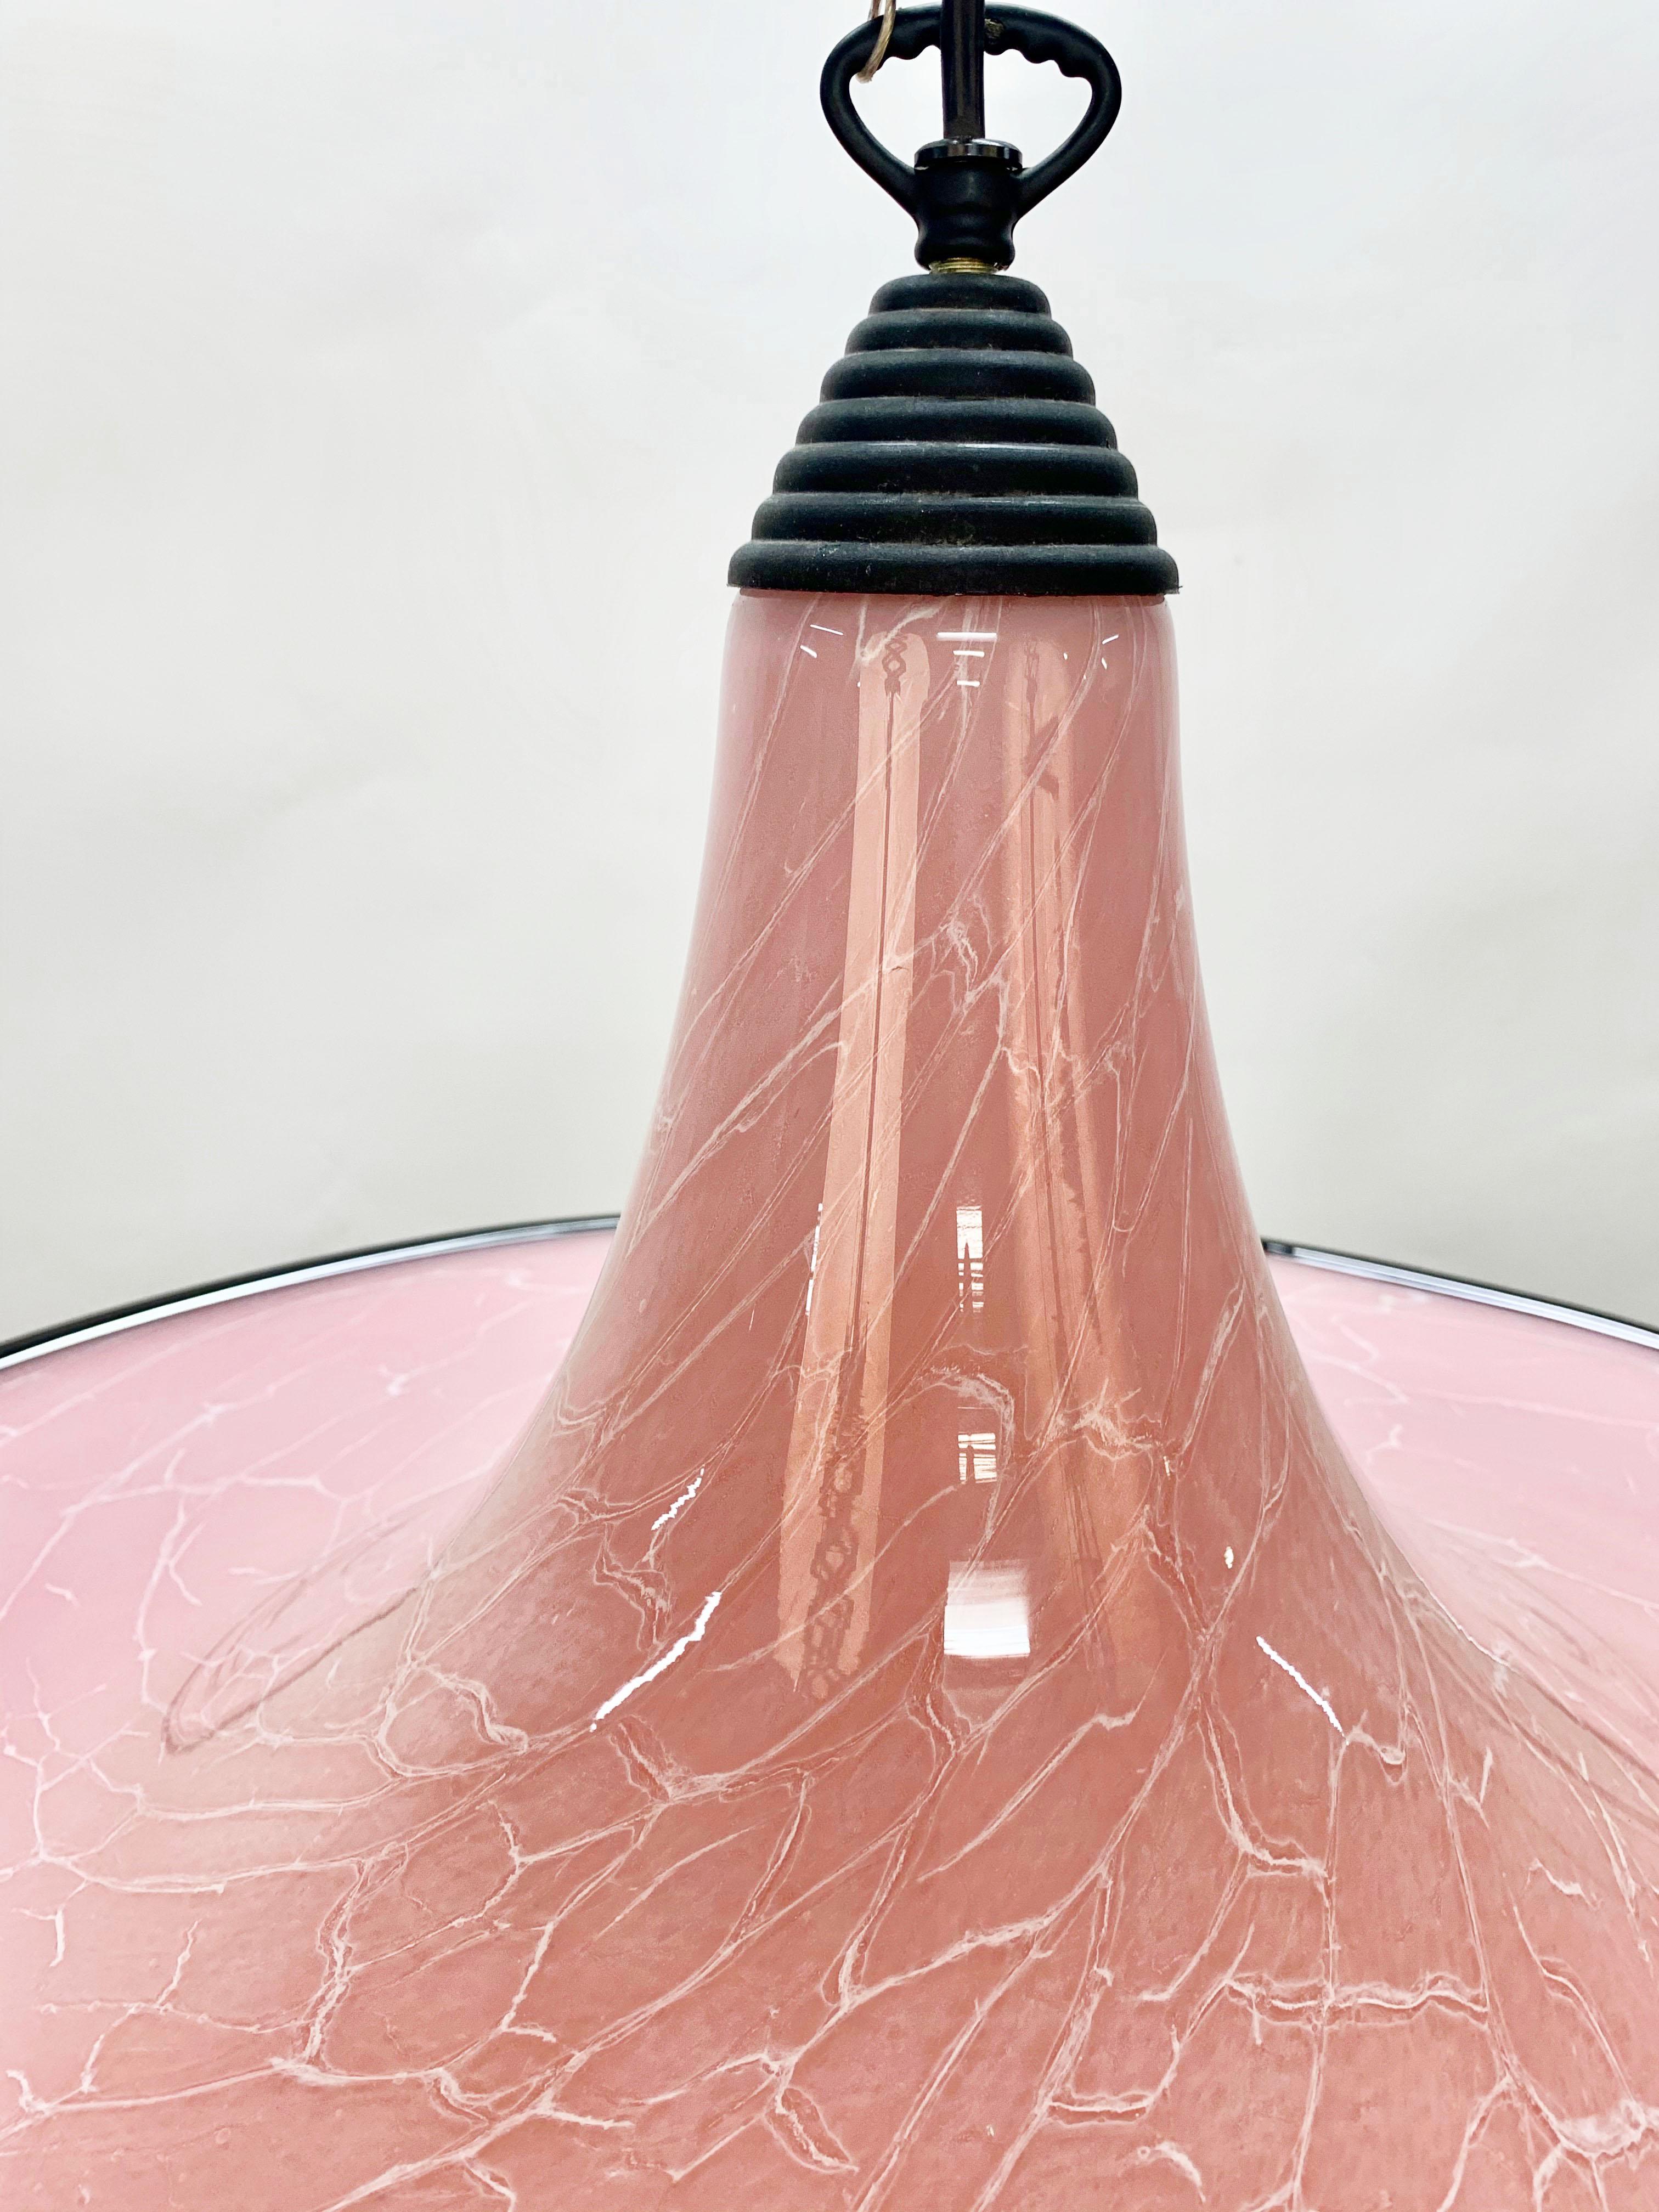 Seguso Midcentury Pink and Black Murano Glass Marble Effect Chandelier, 1970s For Sale 10